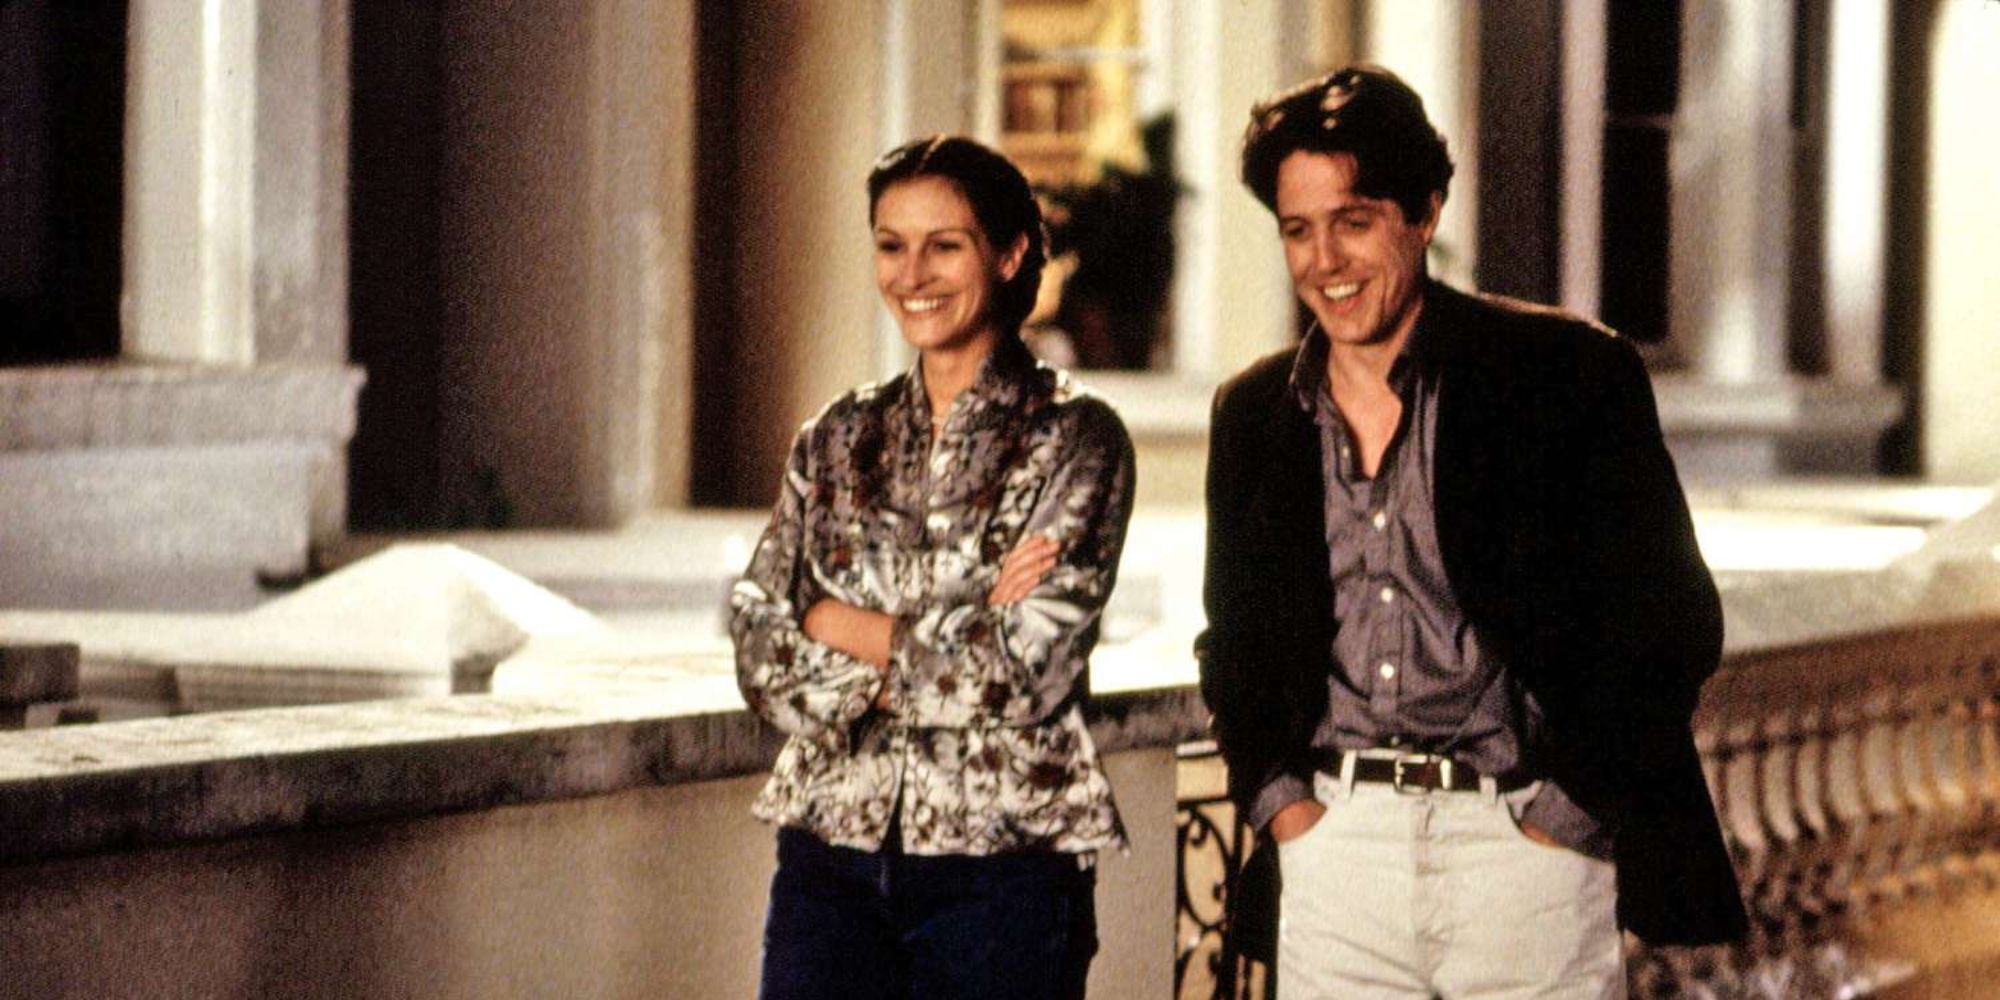 Julia Roberts and hugh Grant walking down a street in Notting Hill